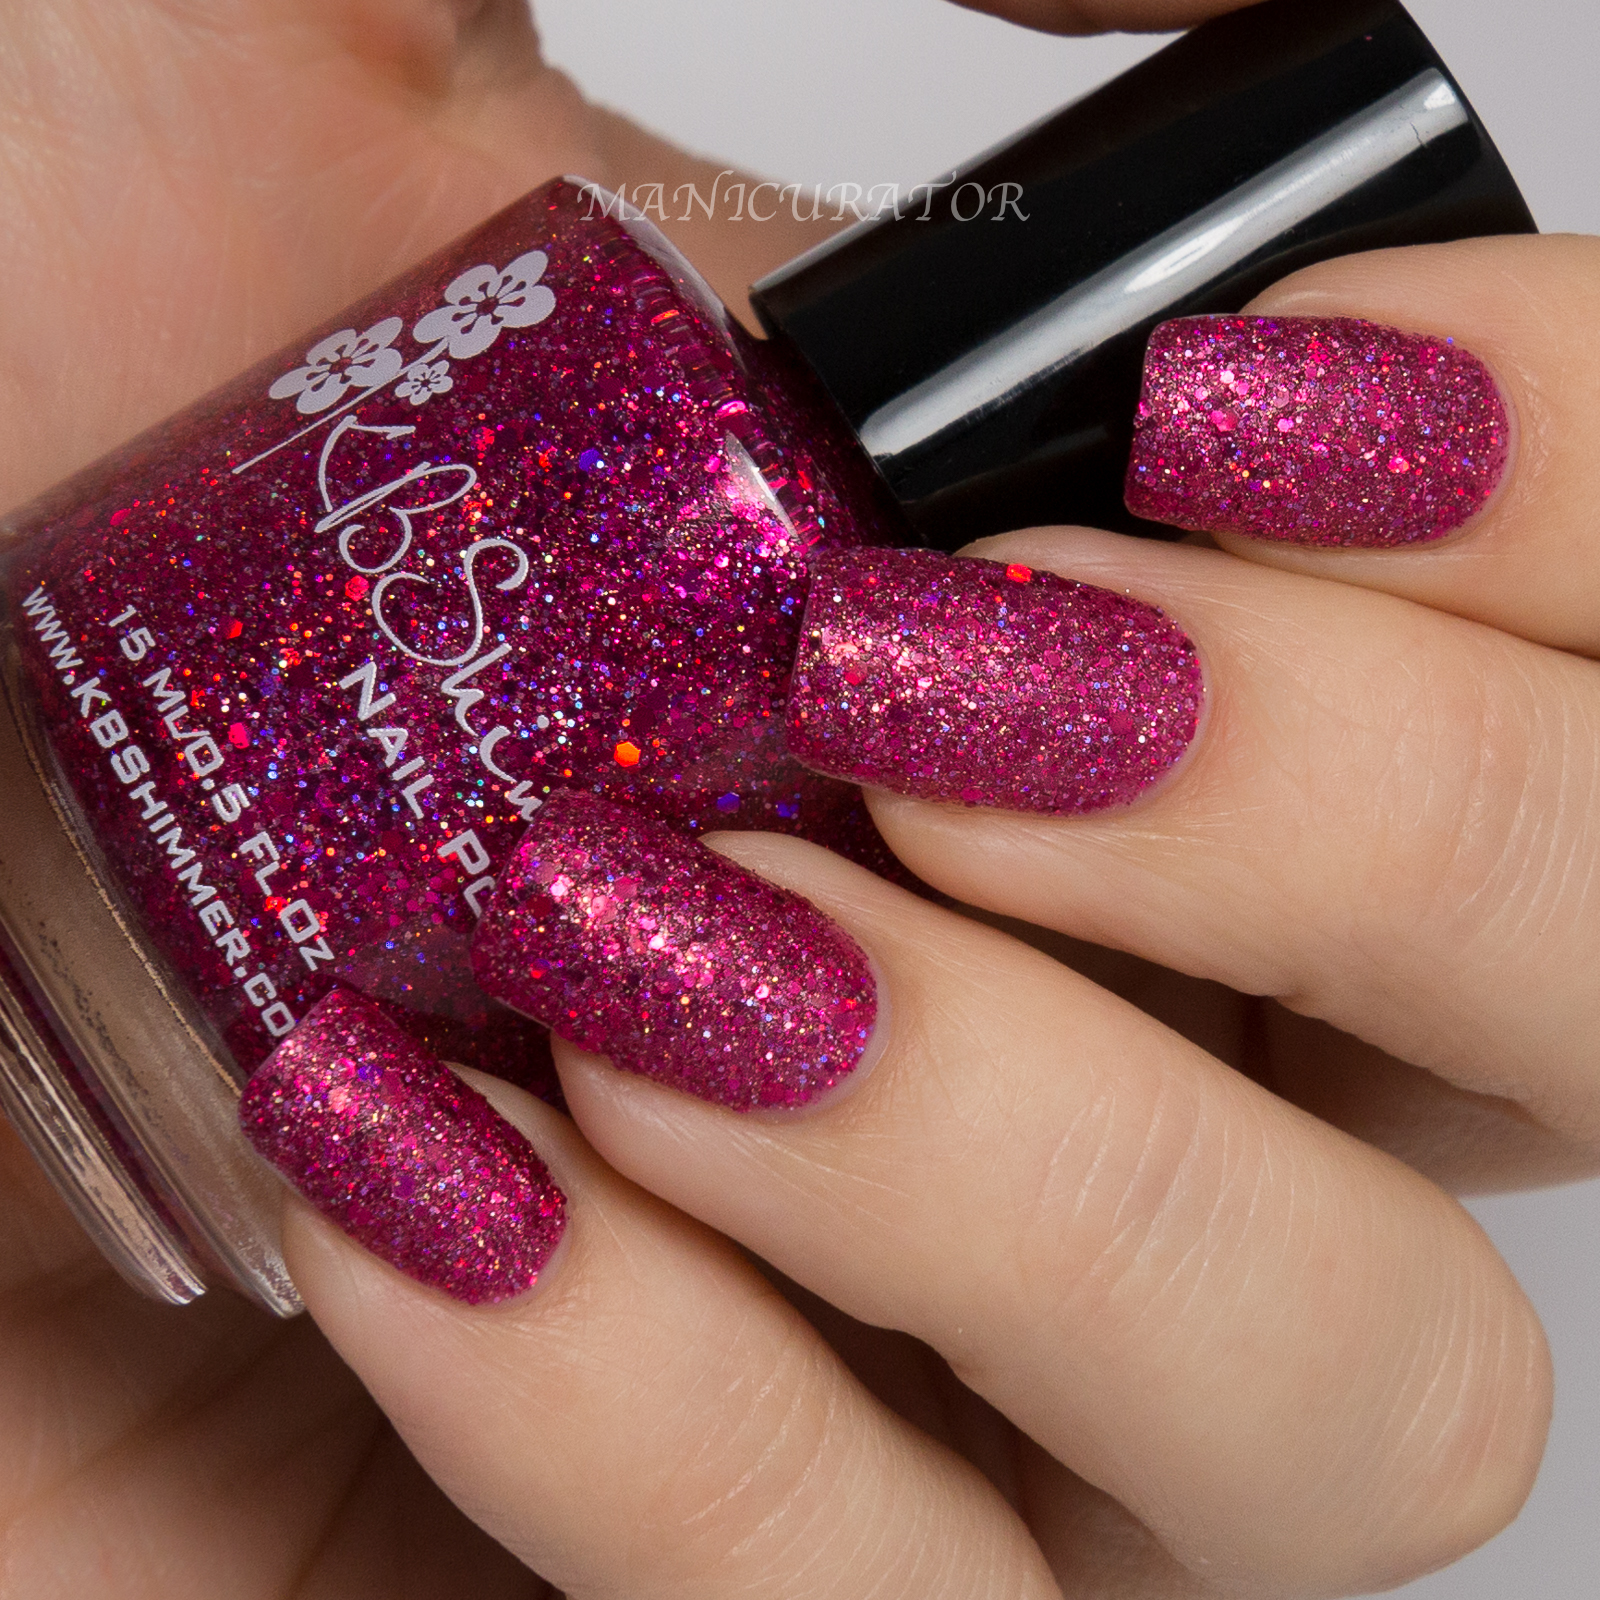 KBShimmer-Winter-2014-Turnip-The-Beet-Texture-Swatch